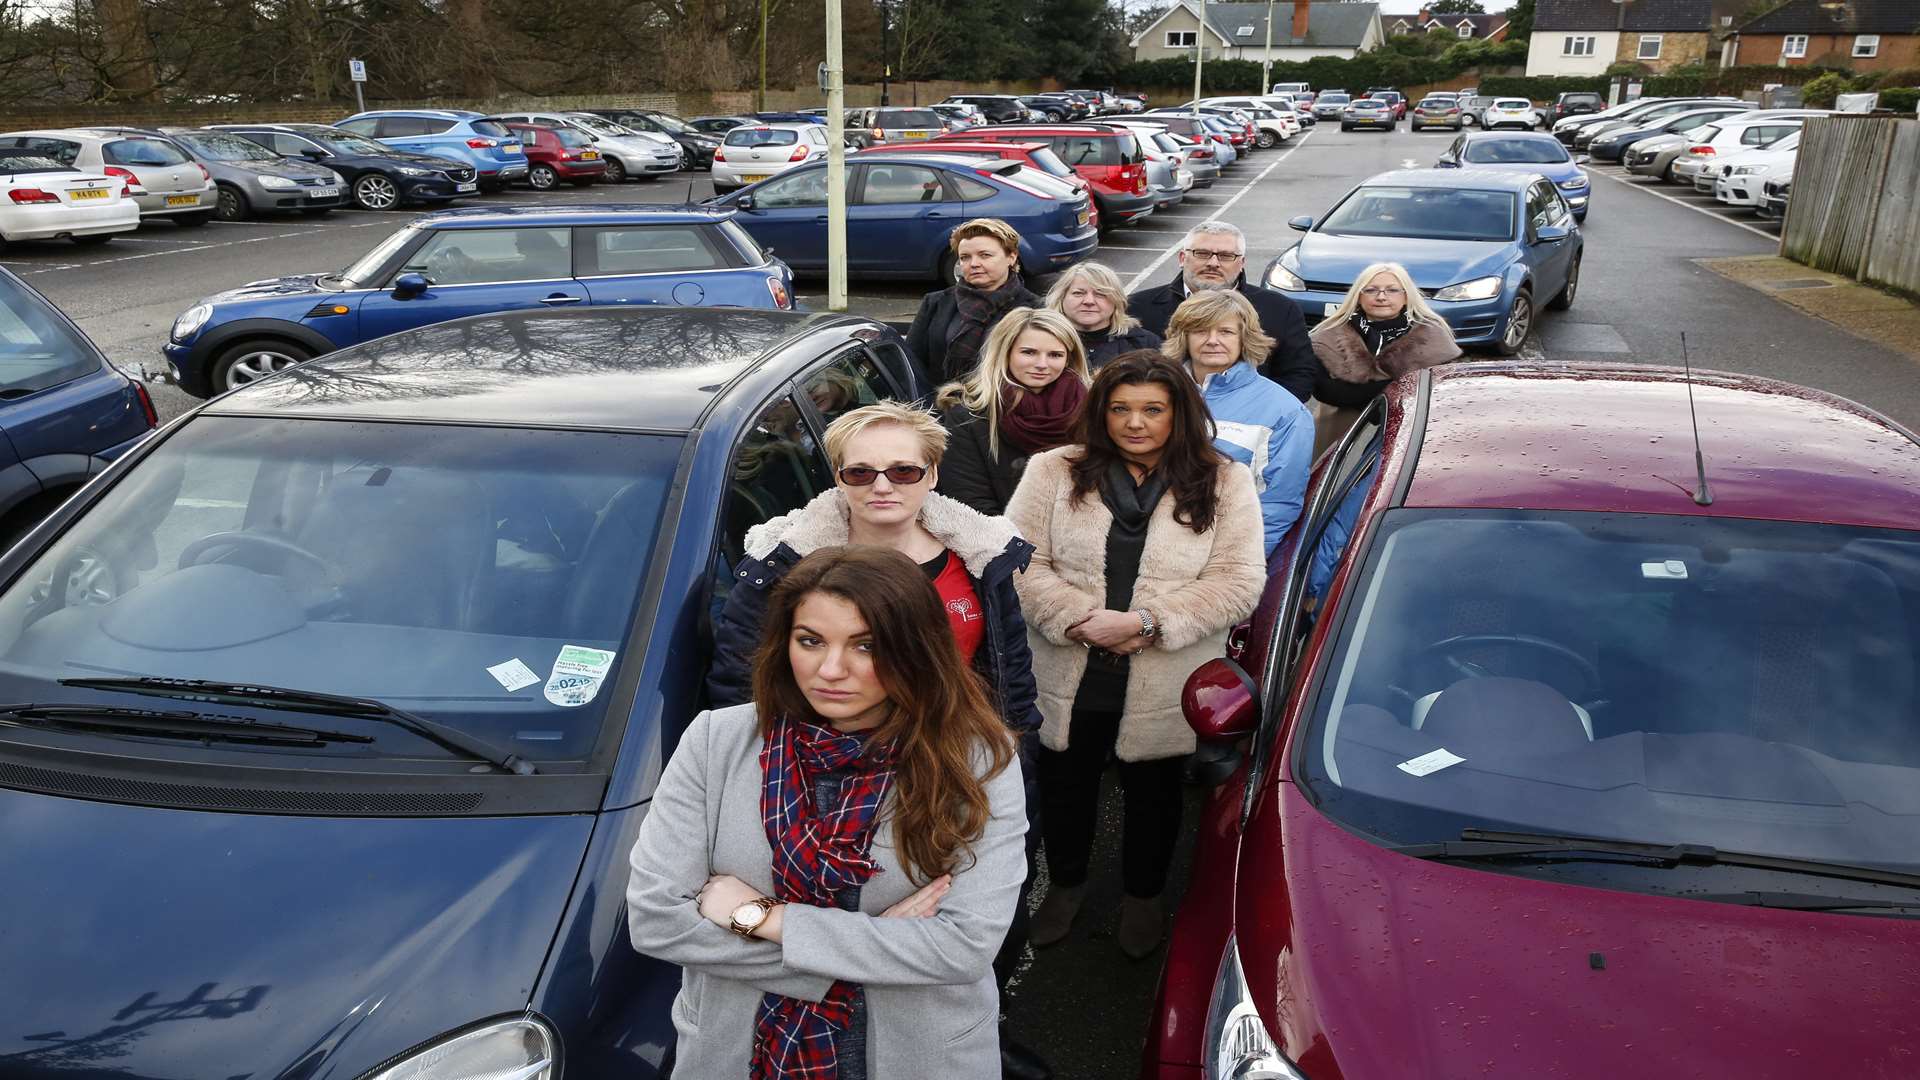 Residents angered by plans to introduce parking charges